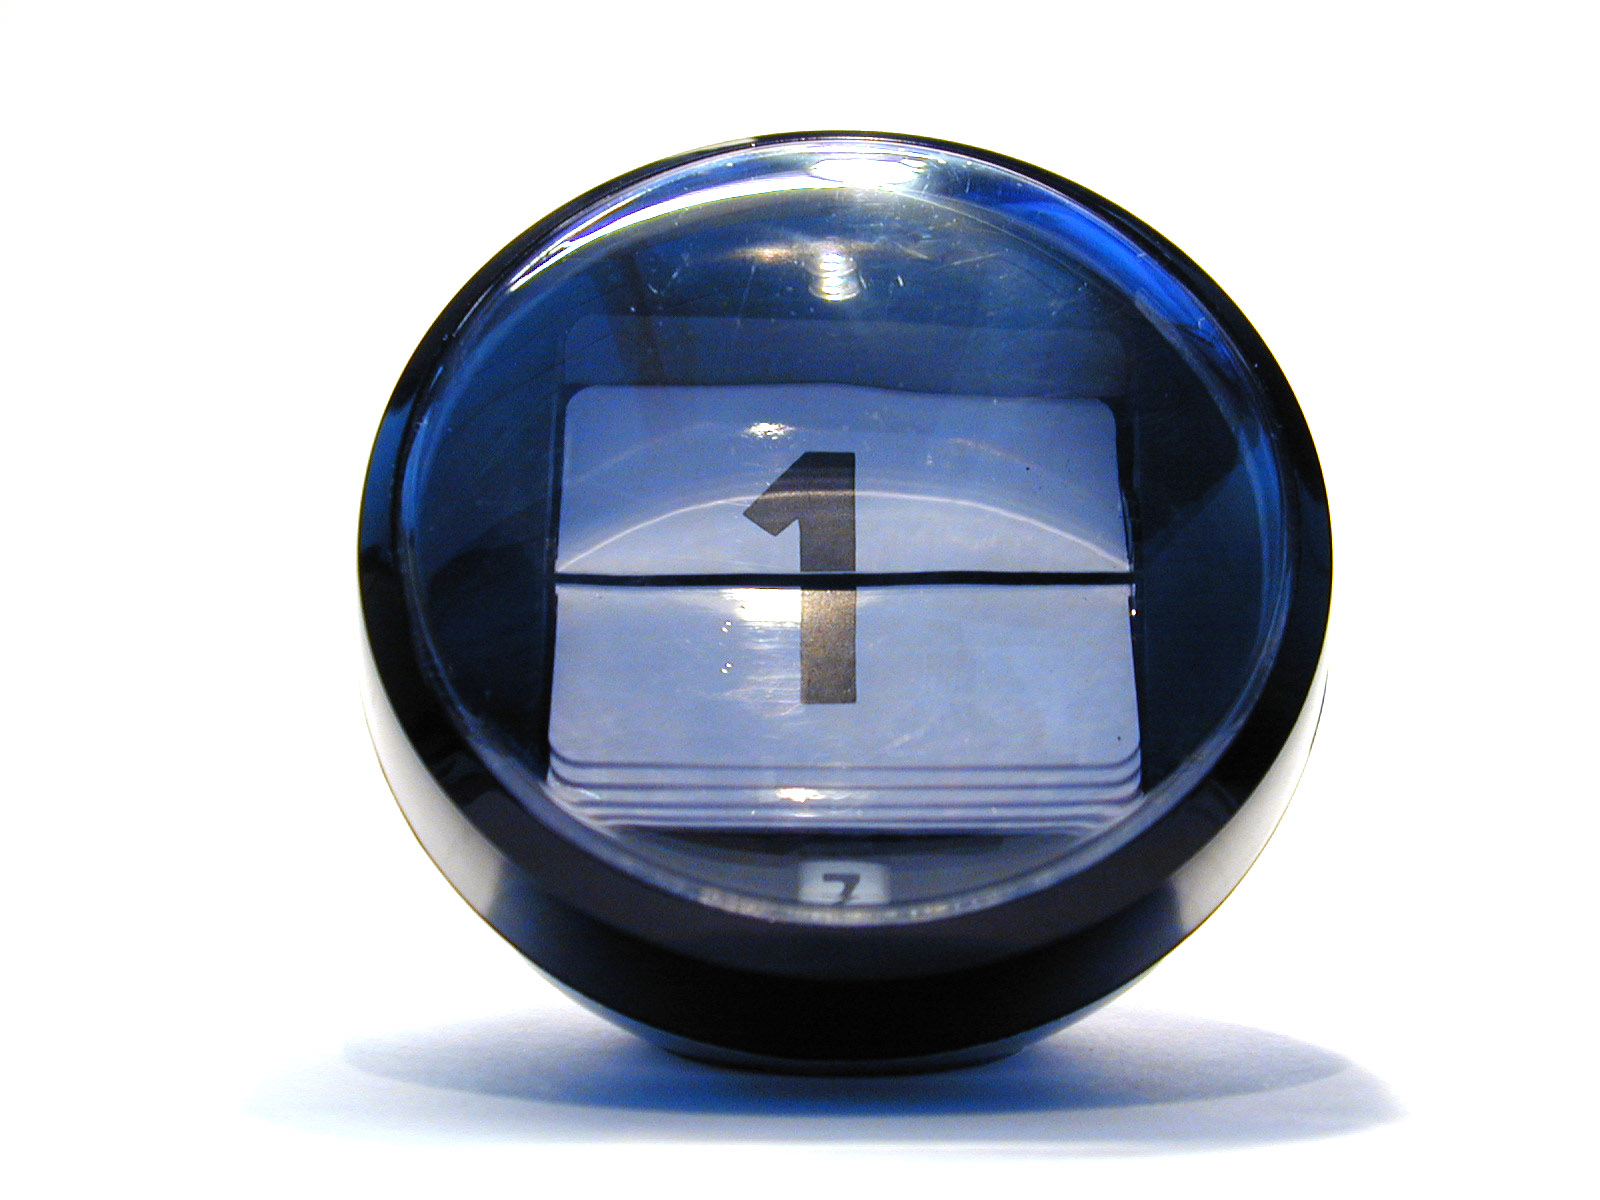 typo typography numbers 1 one sphere plastic objects calendar date image